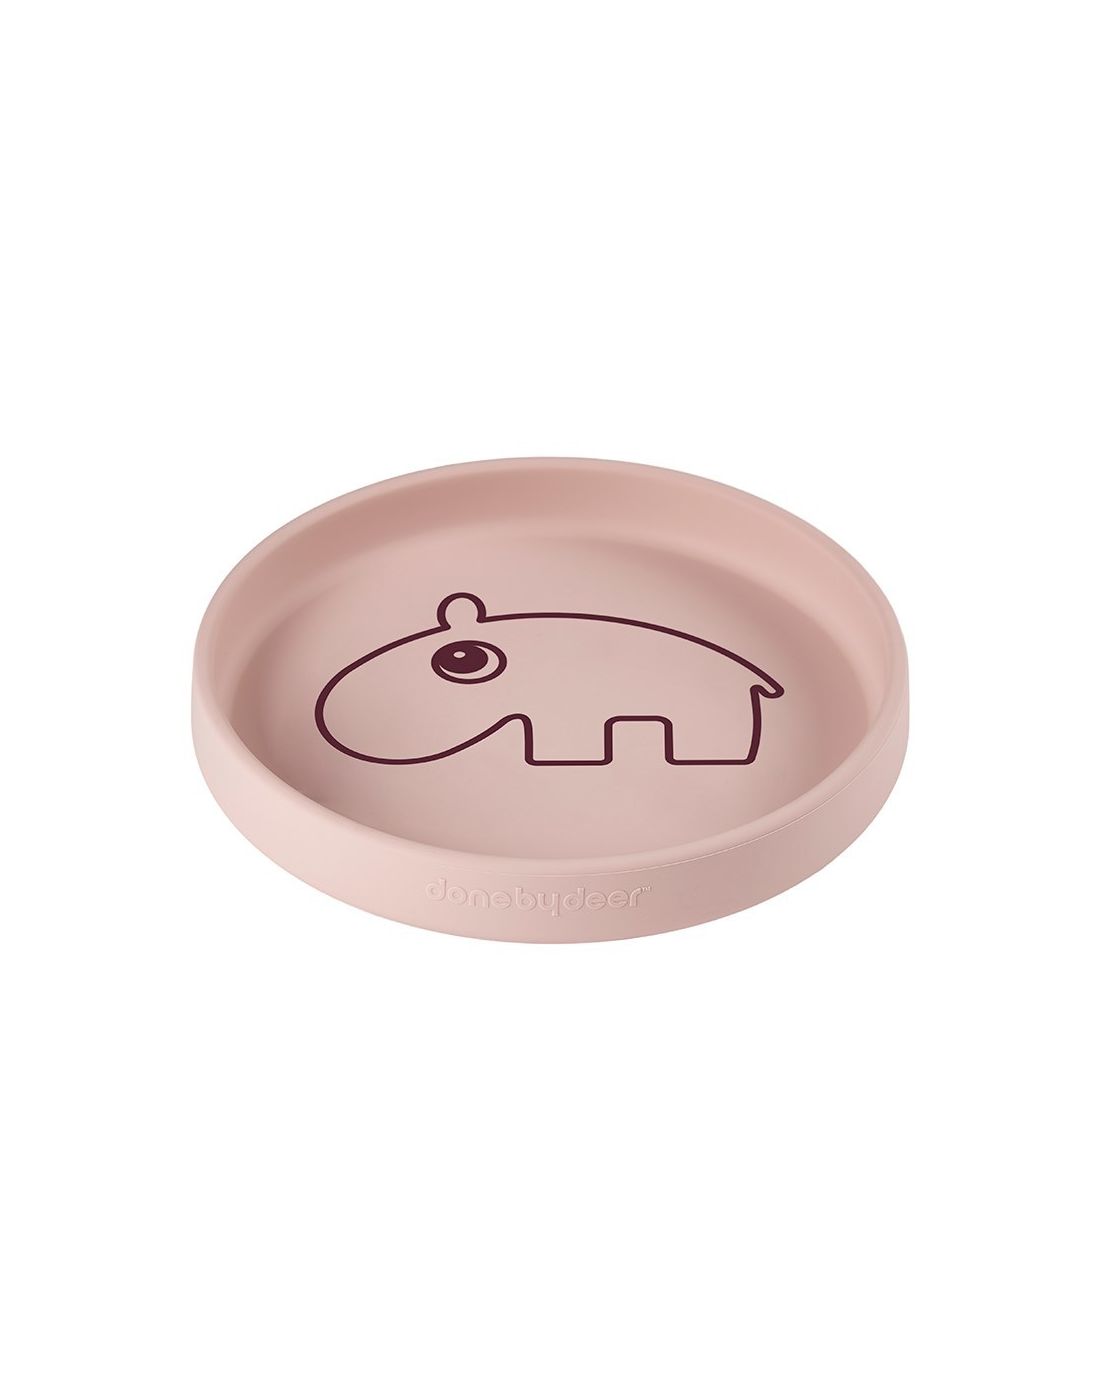 Kids Silicone Plate Ozzo Powder Done By Deer